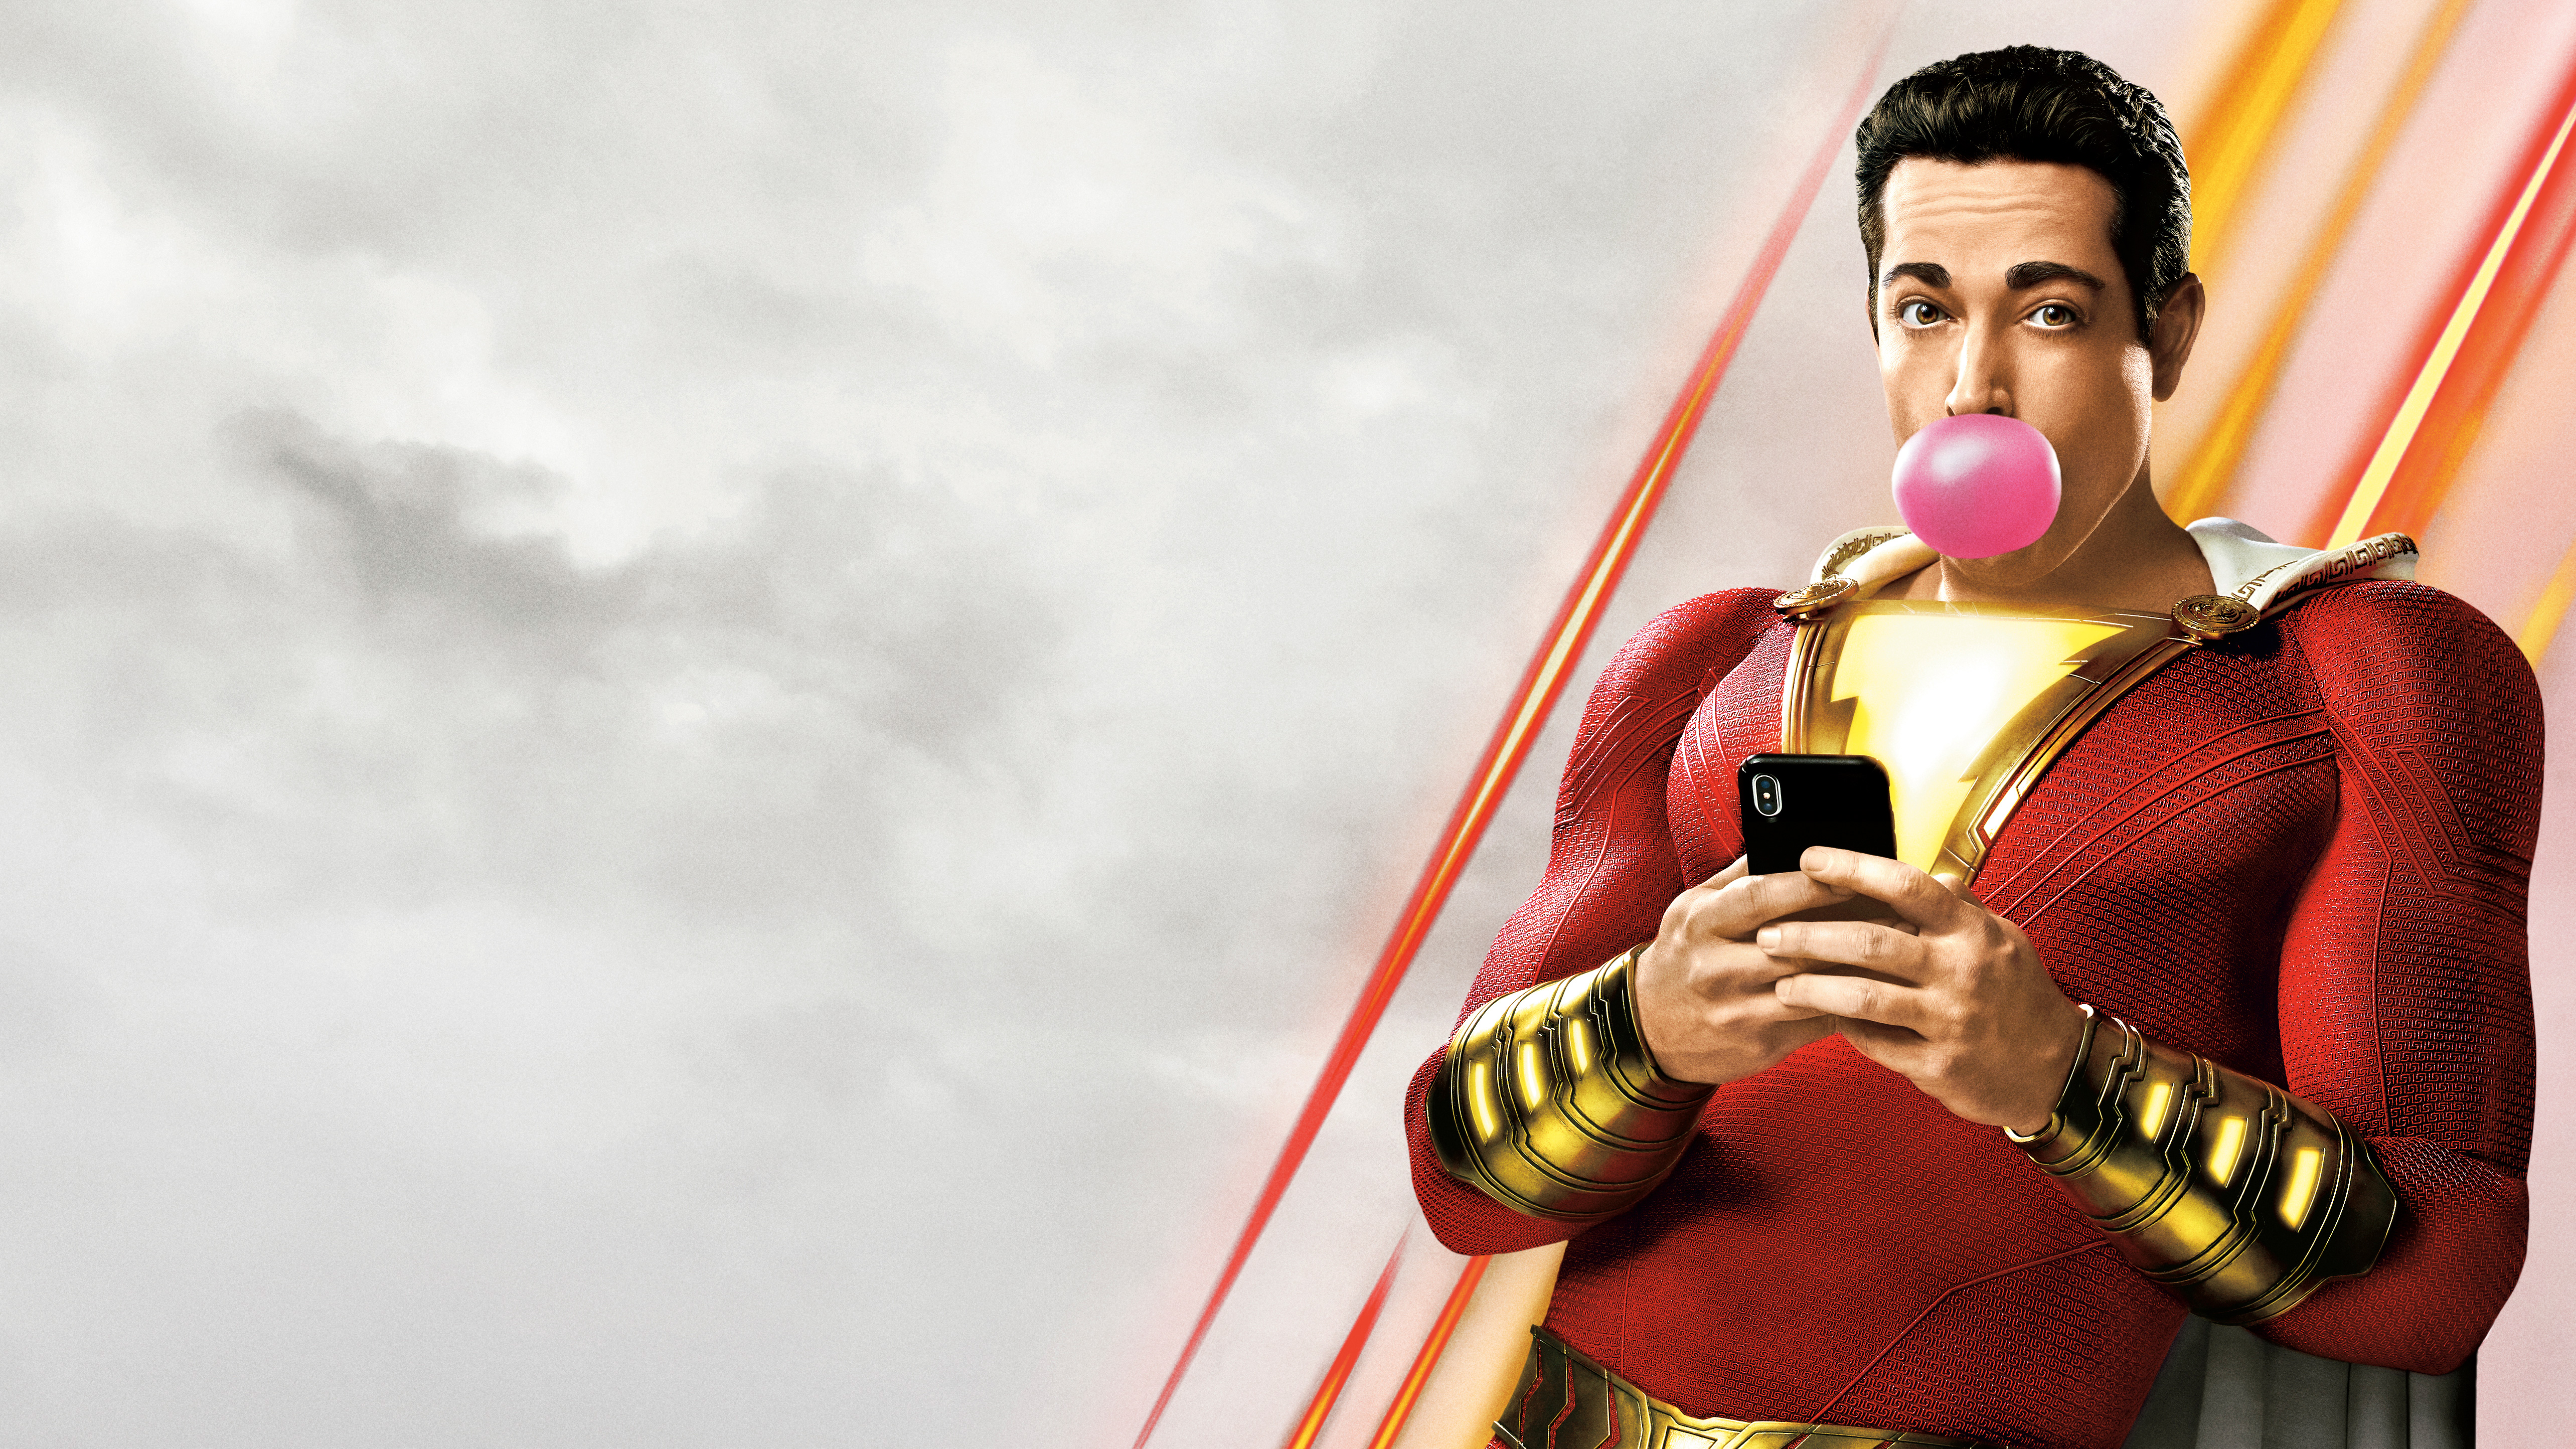 Shazam! Soundtrack Music - Complete Song List | Tunefind